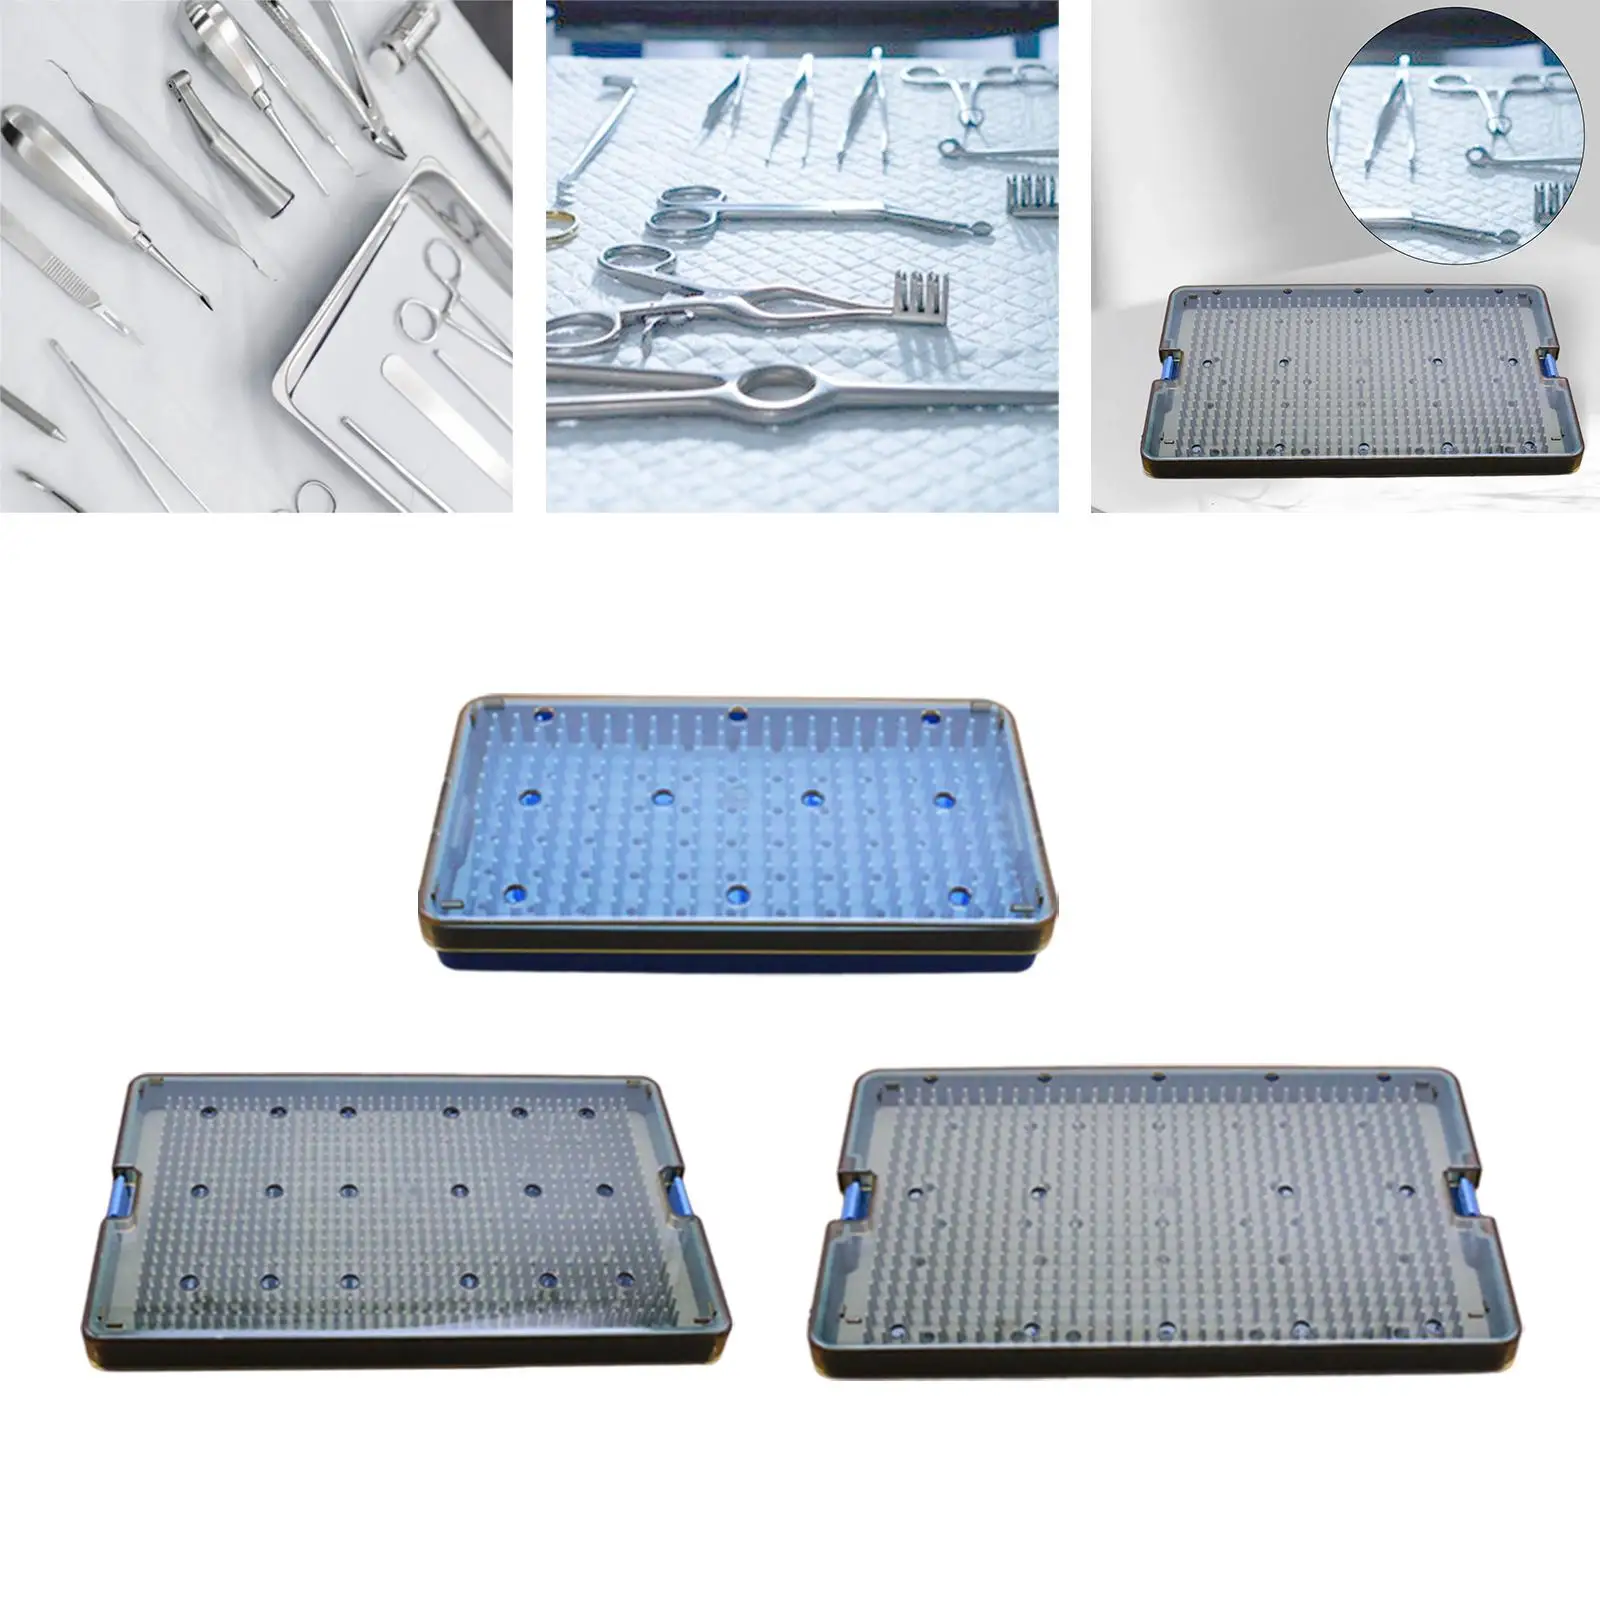 Silicone Sterilization Cassette Autoclavable Box Disinfection Case Easy to Clean Sterilization Tray for Eye Tools Ophthalmic